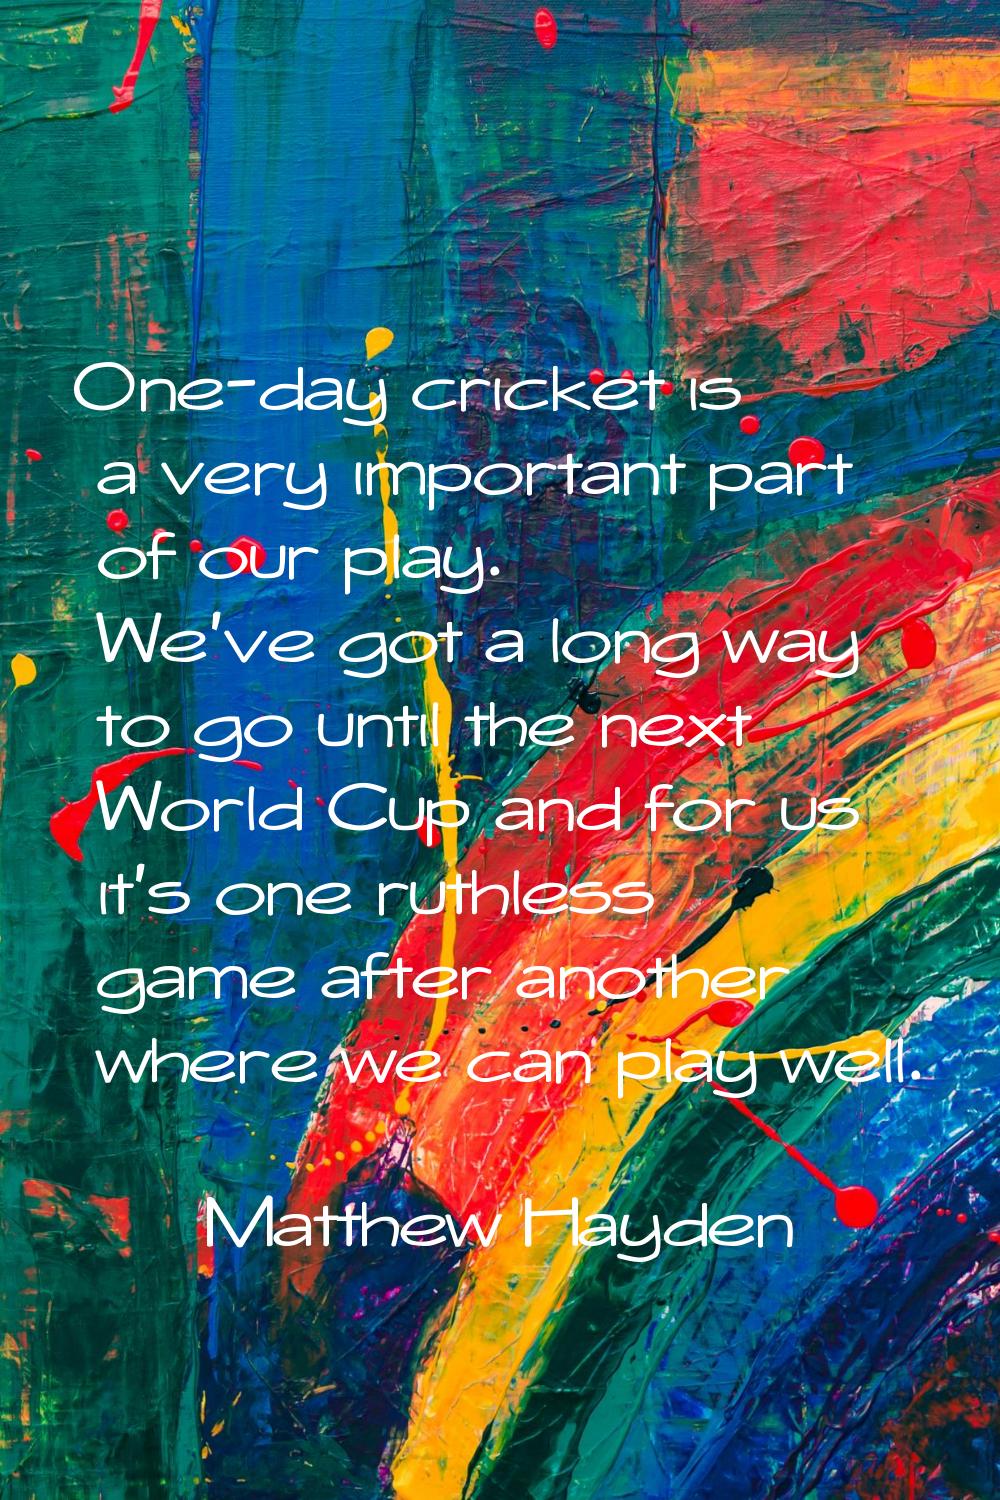 One-day cricket is a very important part of our play. We've got a long way to go until the next Wor